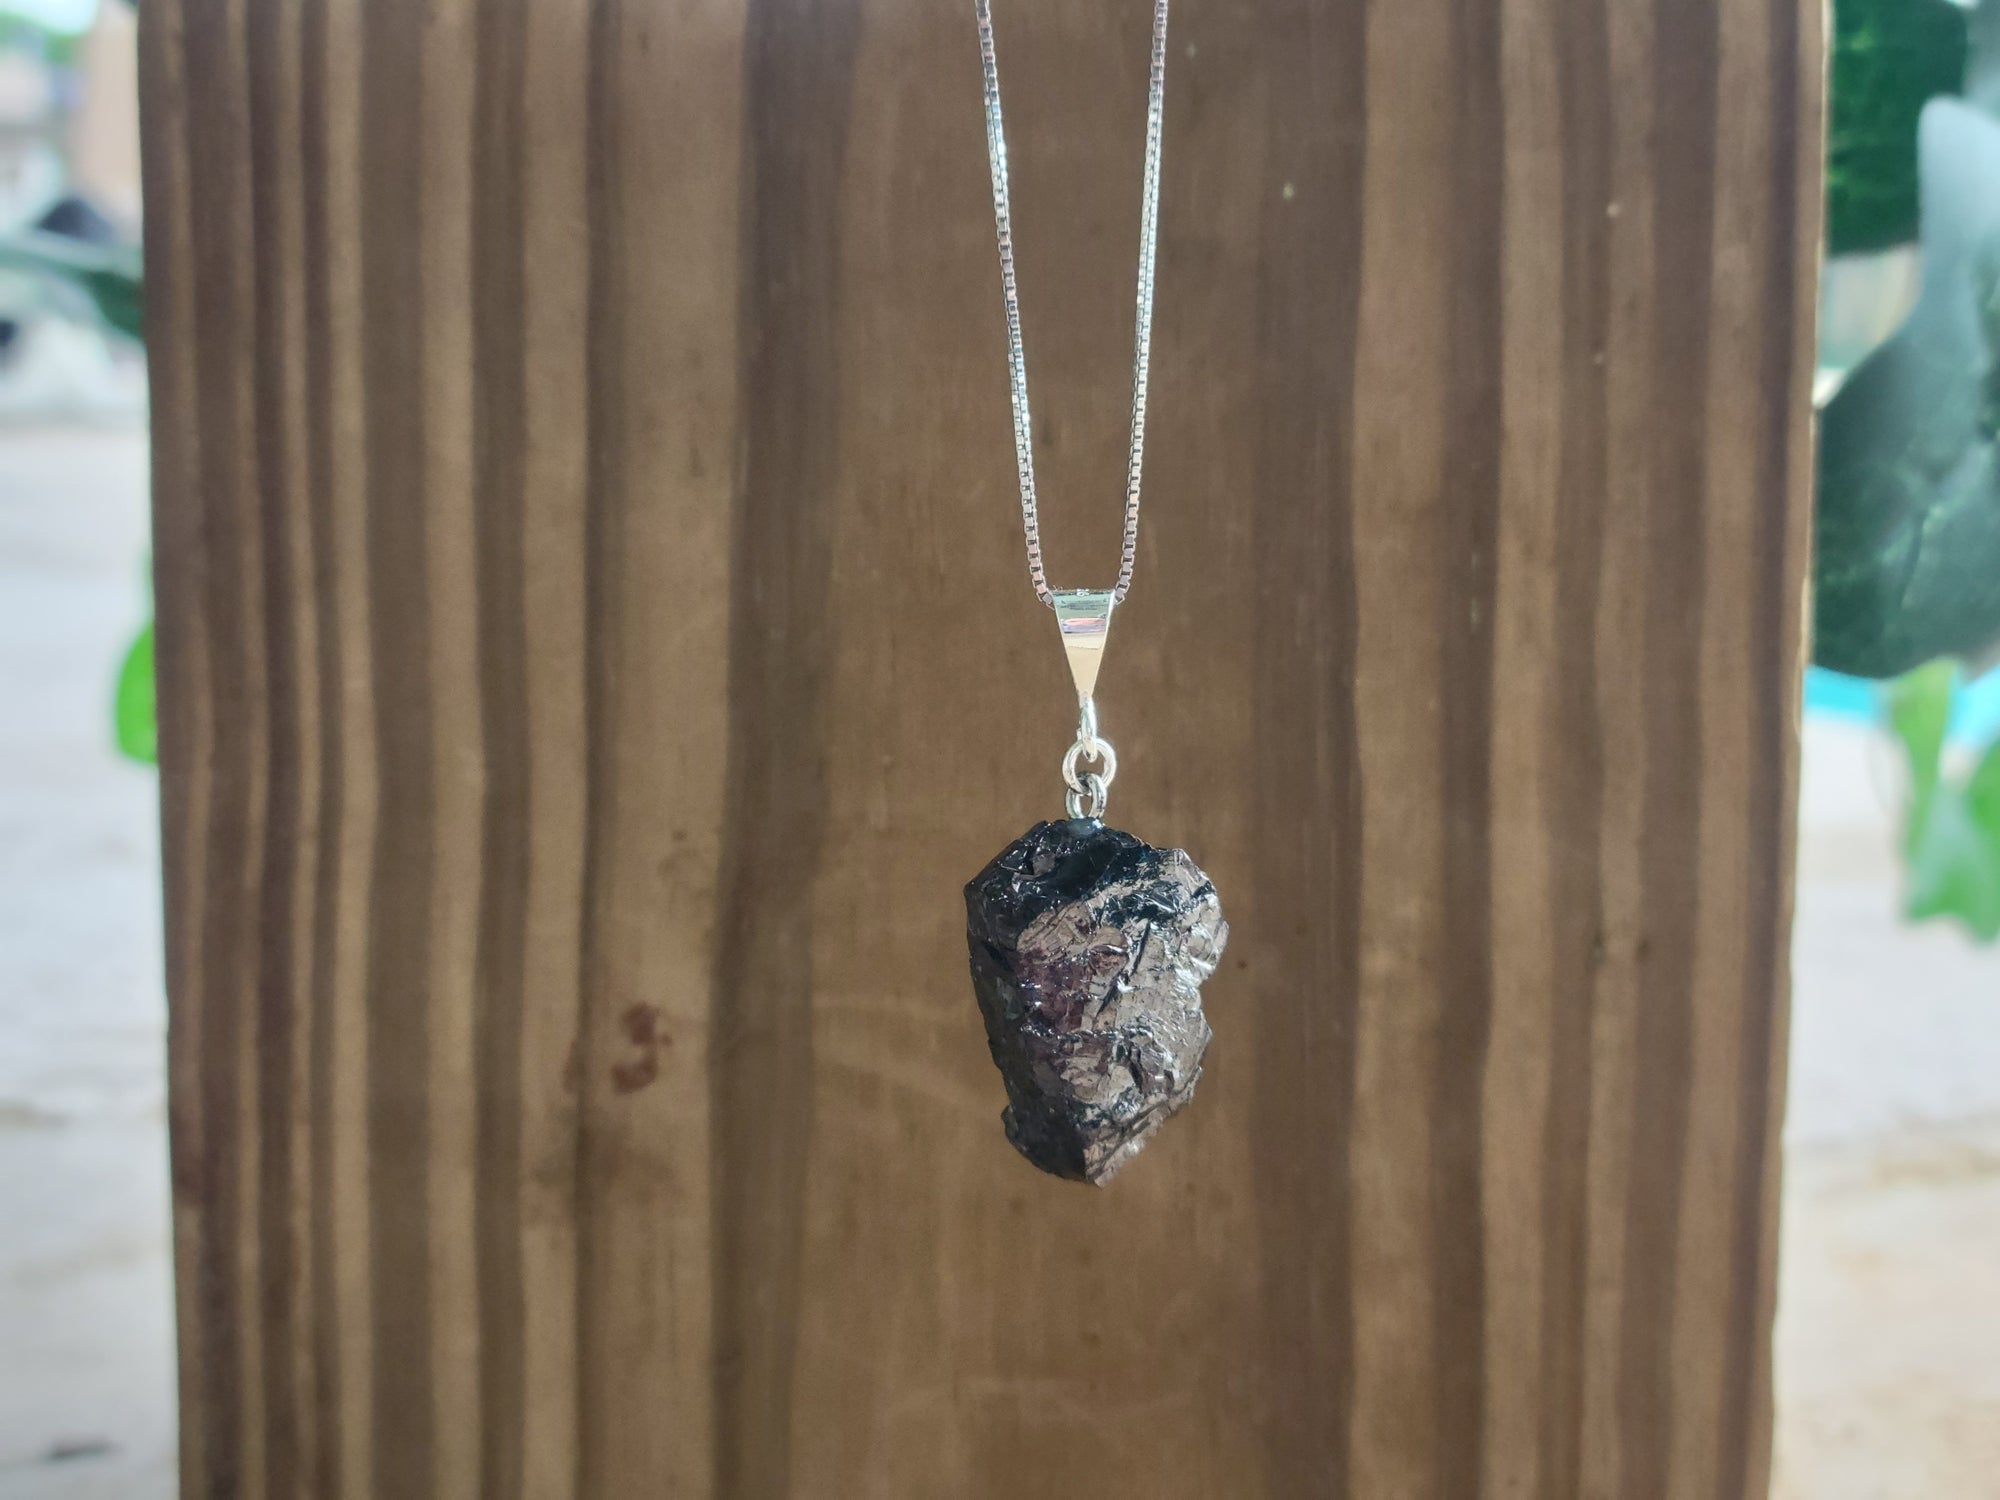 Elite Noble Raw Shungite Pendant and Sterling Silver Necklace (3 - 5 grams)